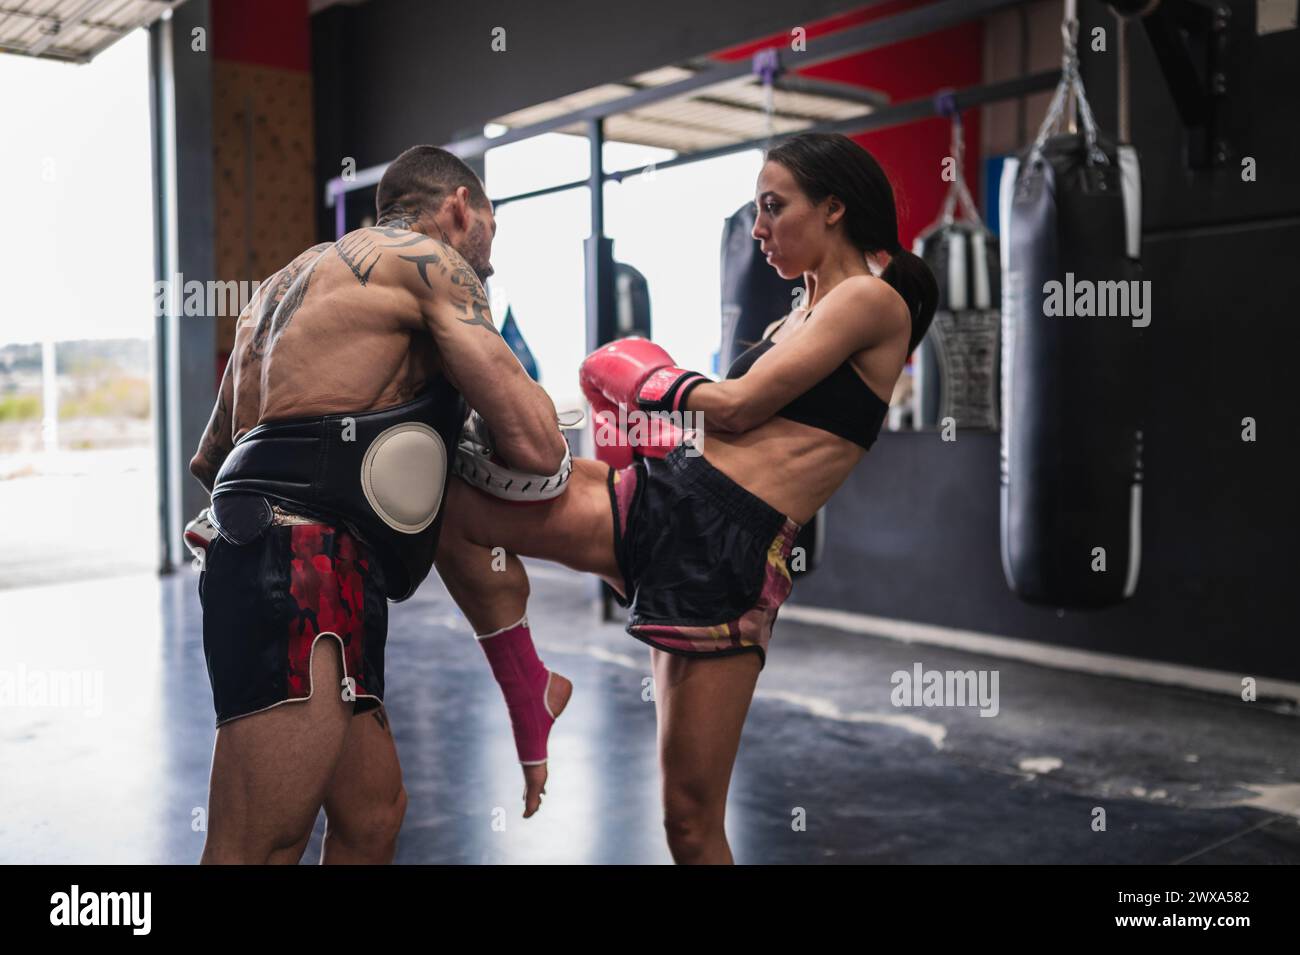 Female martial artist sparring with personal trainer in gym Stock Photo